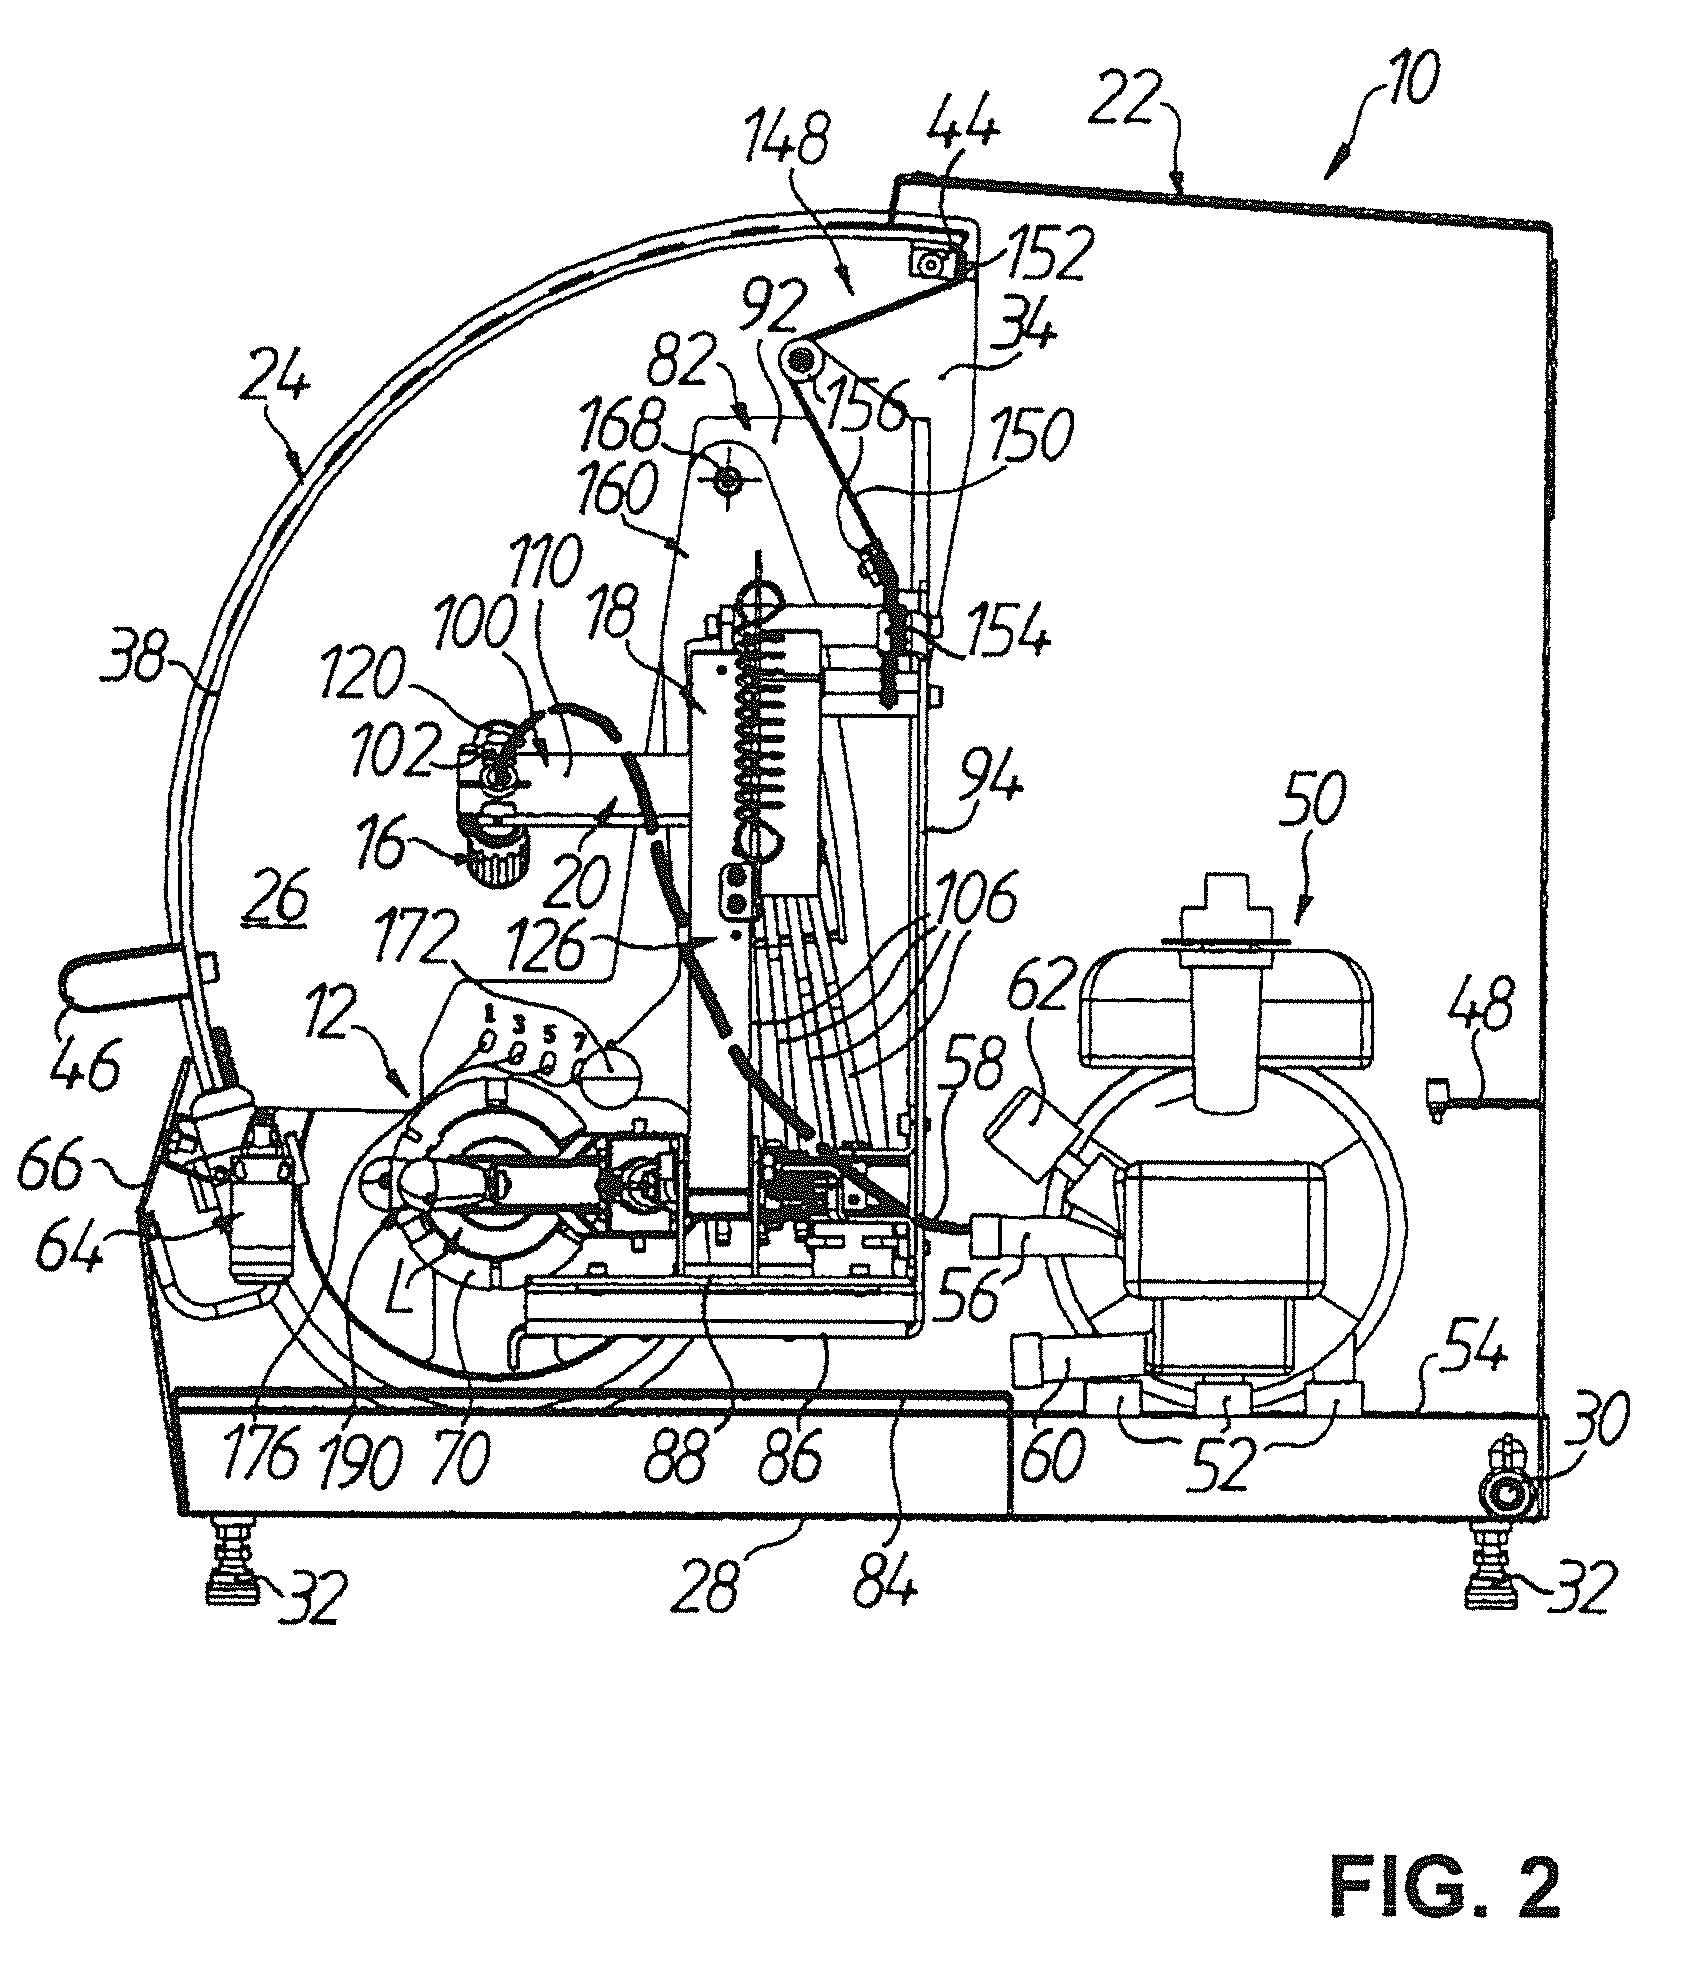 Device for deblocking optical workpieces, in particular eyeglass lenses